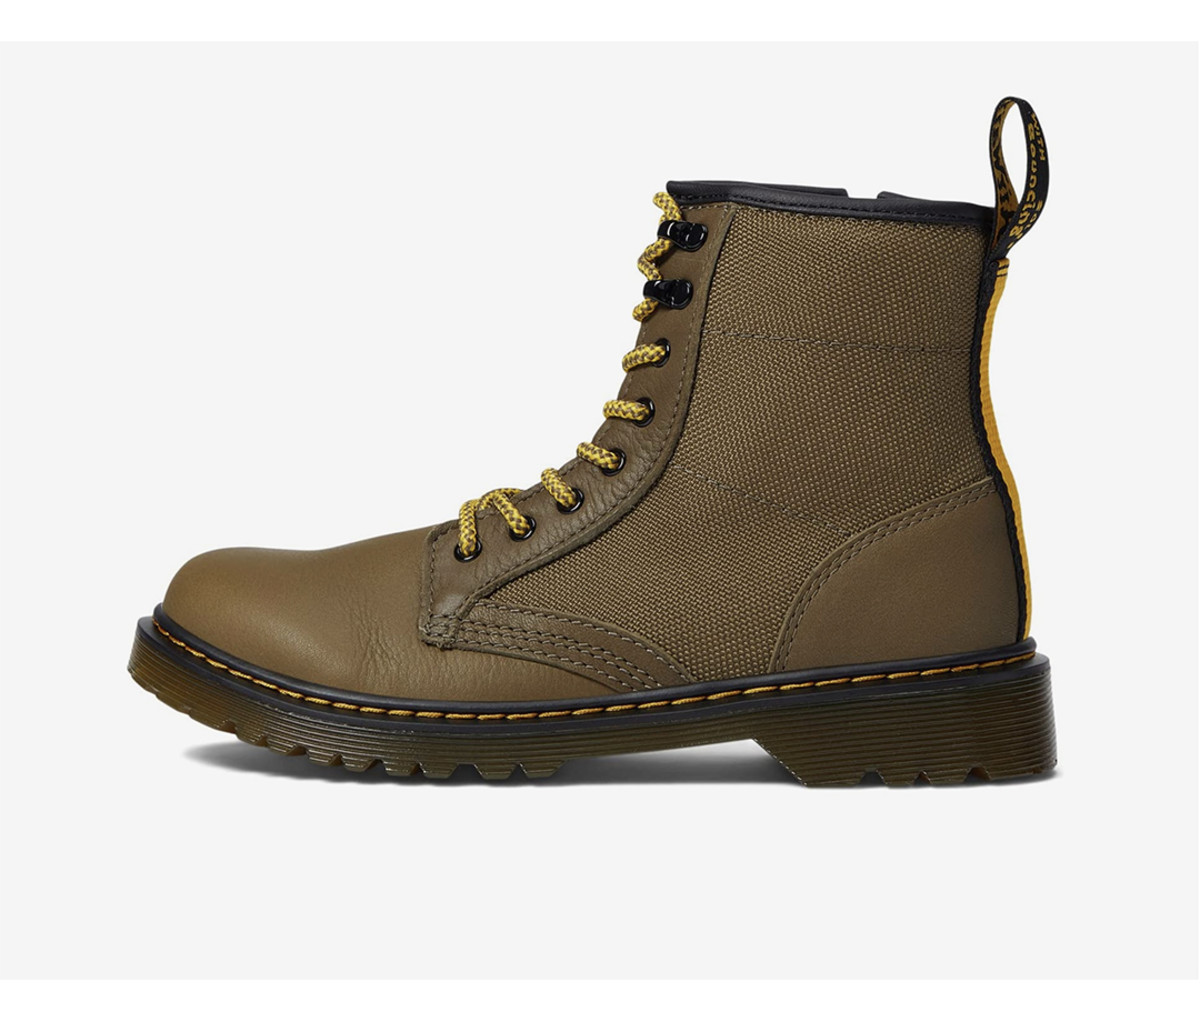 Dr. Martens Kid's Collection 1460 Panel Boots